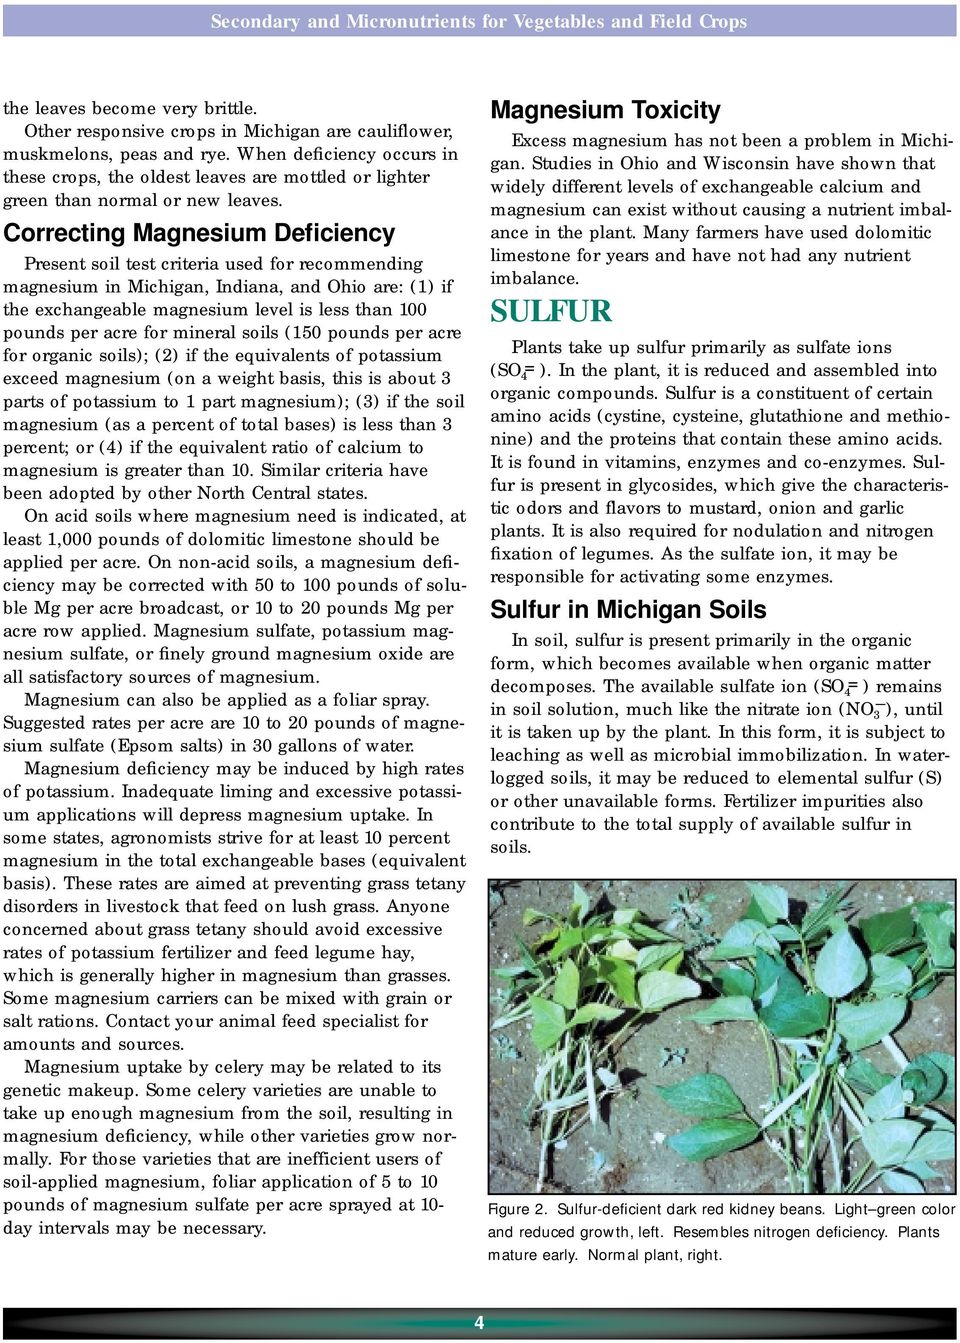 Correcting Magnesium Deficiency Present soil test criteria used for recommending magnesium in Michigan, Indiana, and Ohio are: (1) if the exchangeable magnesium level is less than 100 pounds per acre